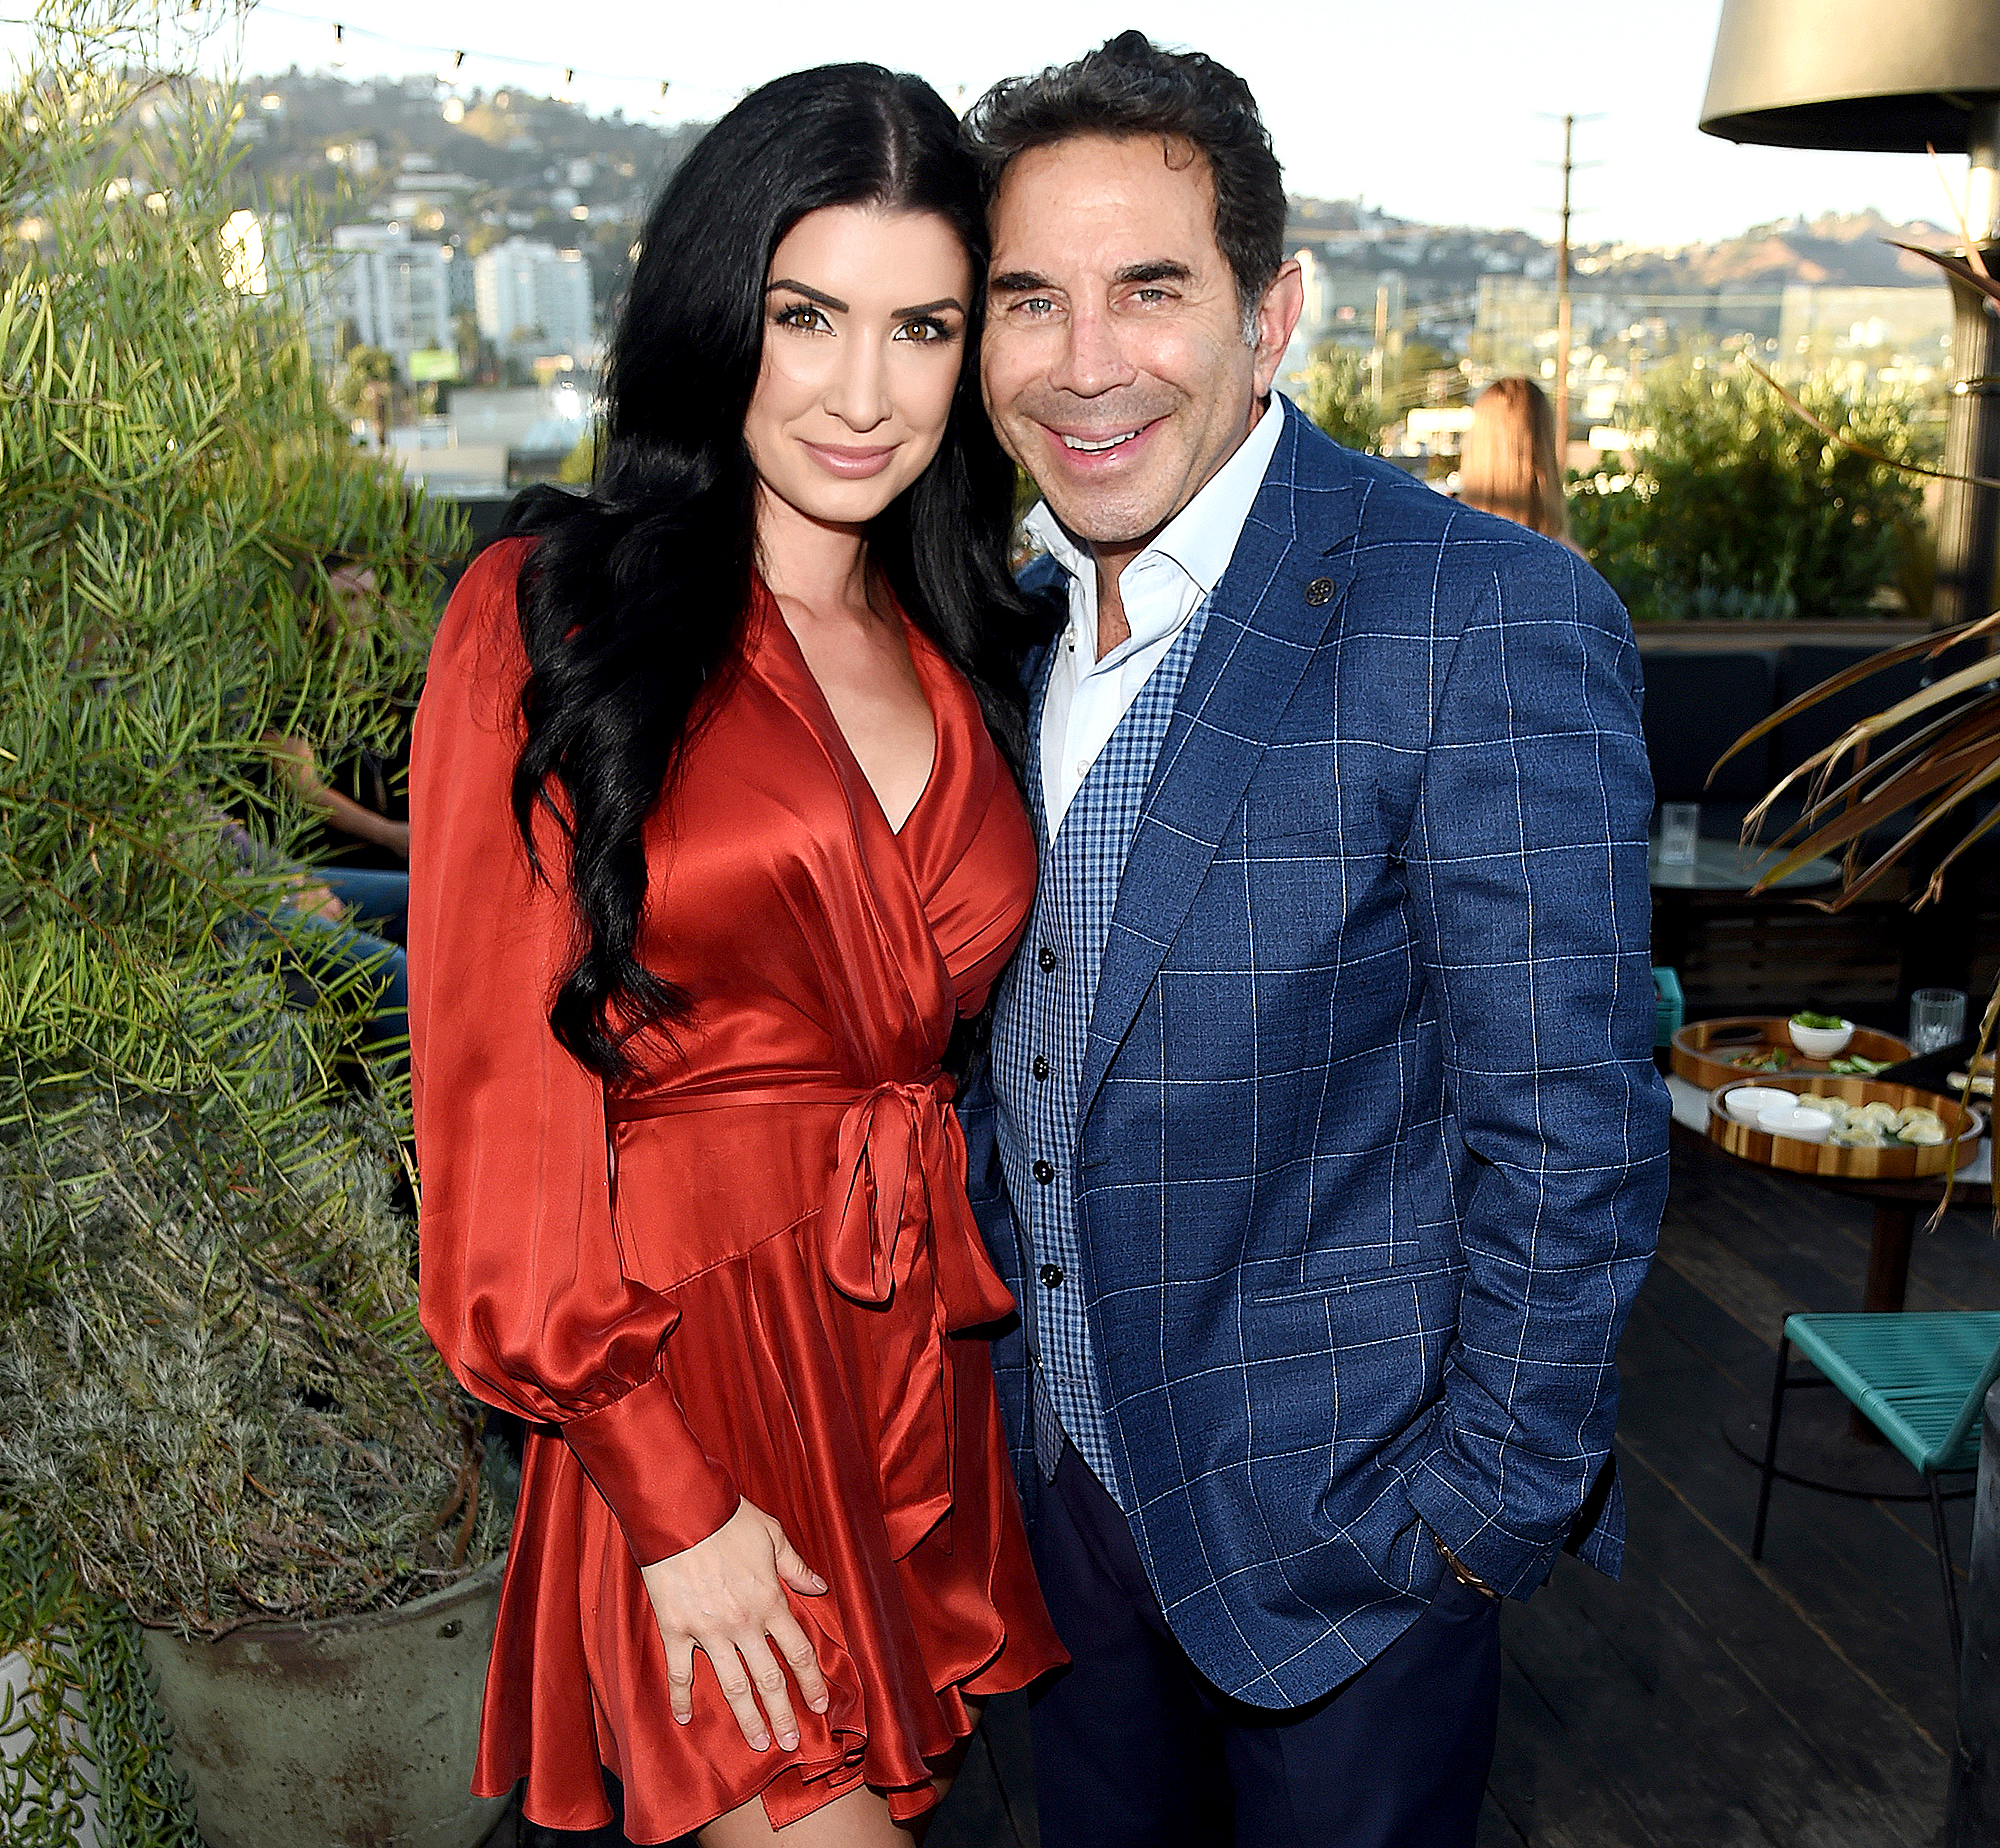 Who Is Botched's Dr. Paul Nassif's Wife, Brittany Pattakos?